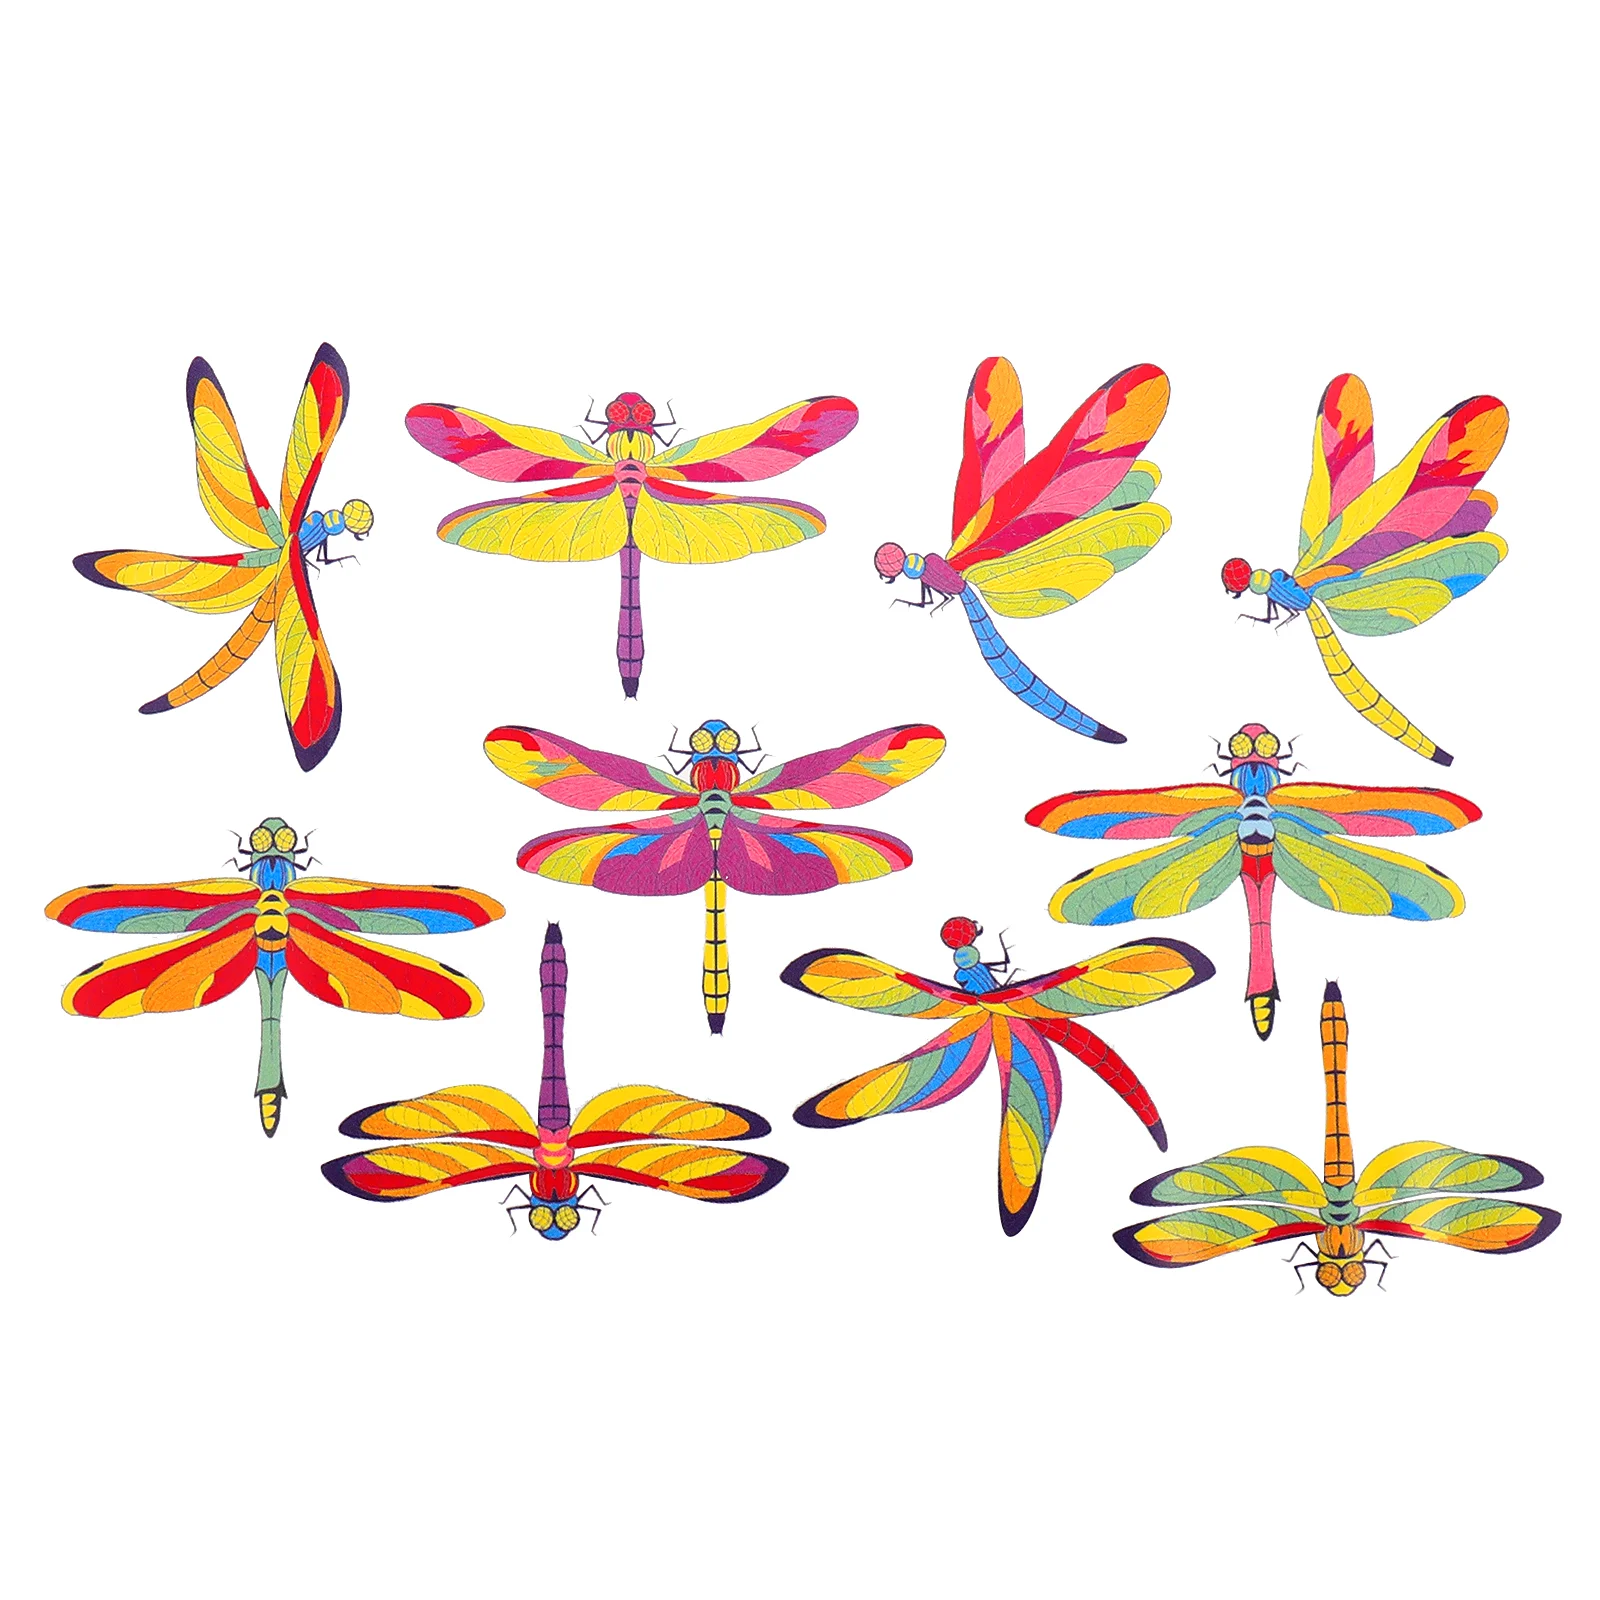 

Window Birds Sticker Avoiding Decals Clings Decal Wall Anti Collision Dragonfly Cling Decors Alert Bird Strikes